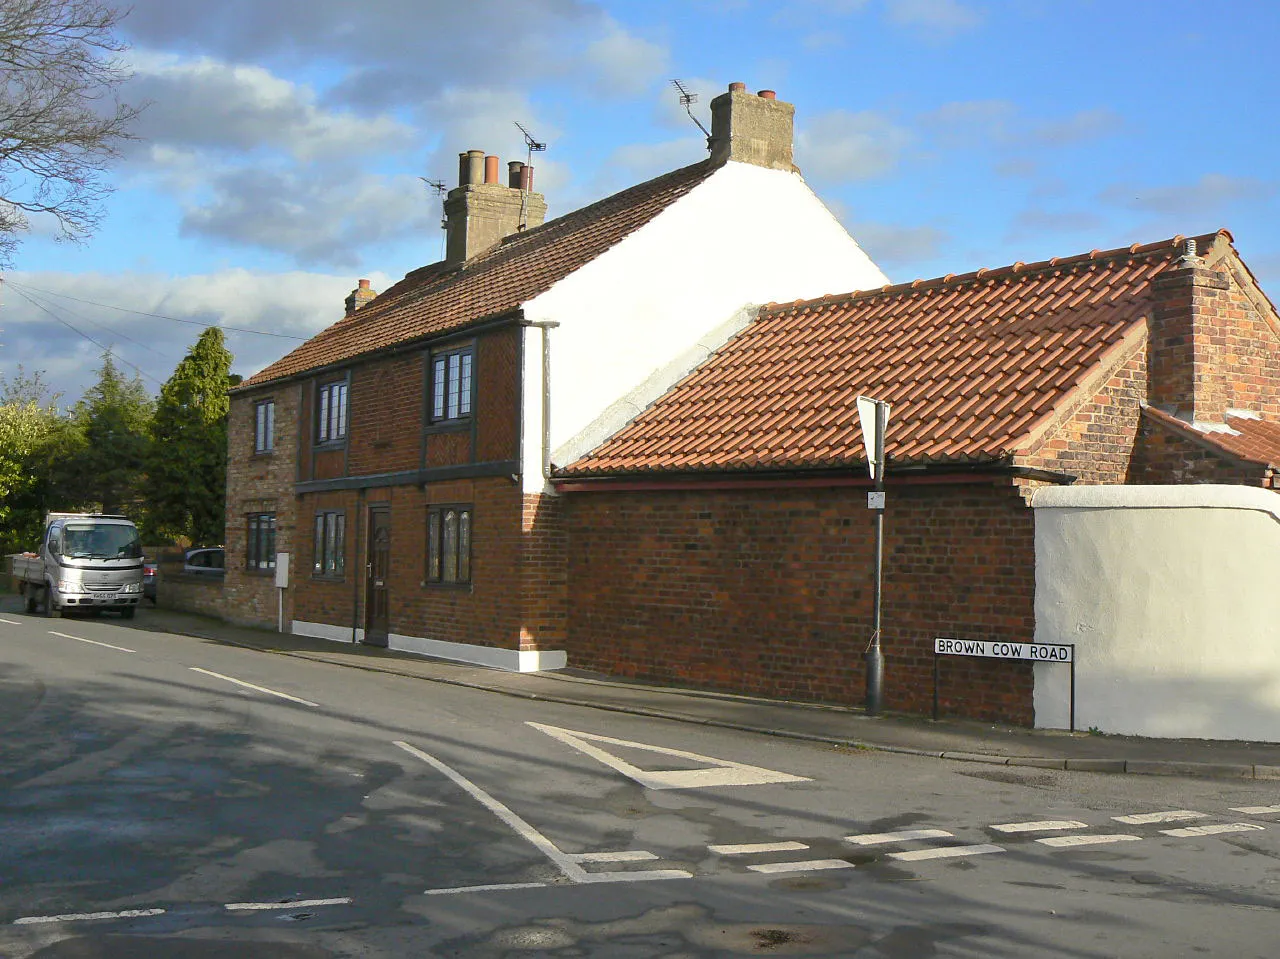 Photo showing: House on Brown Cow Road